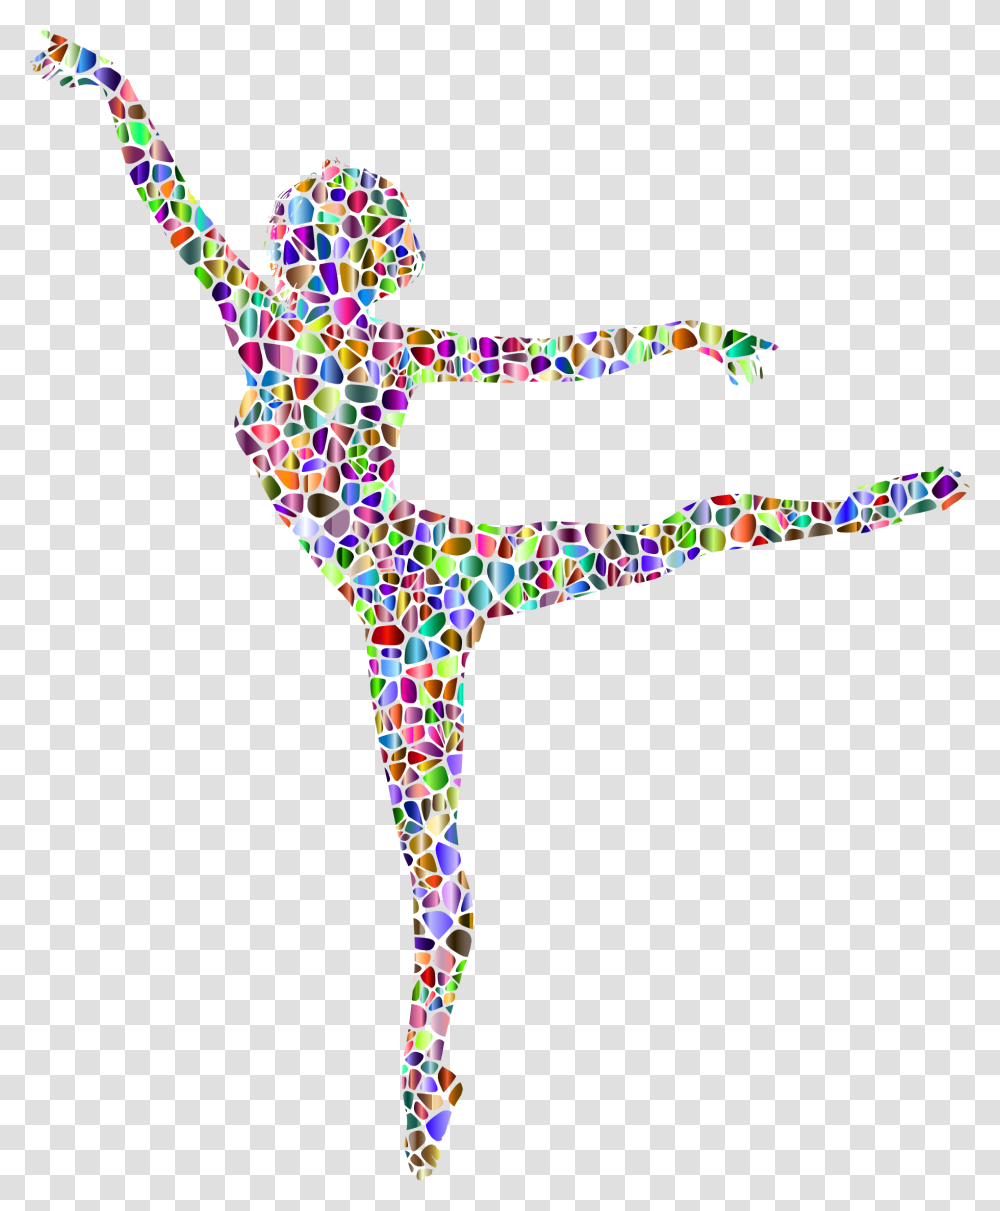 Polychromatic Tiled Lithe Dancing Woman Silhouette Background Dancing Woman Silhouette, Light, Cross, Crowd Transparent Png